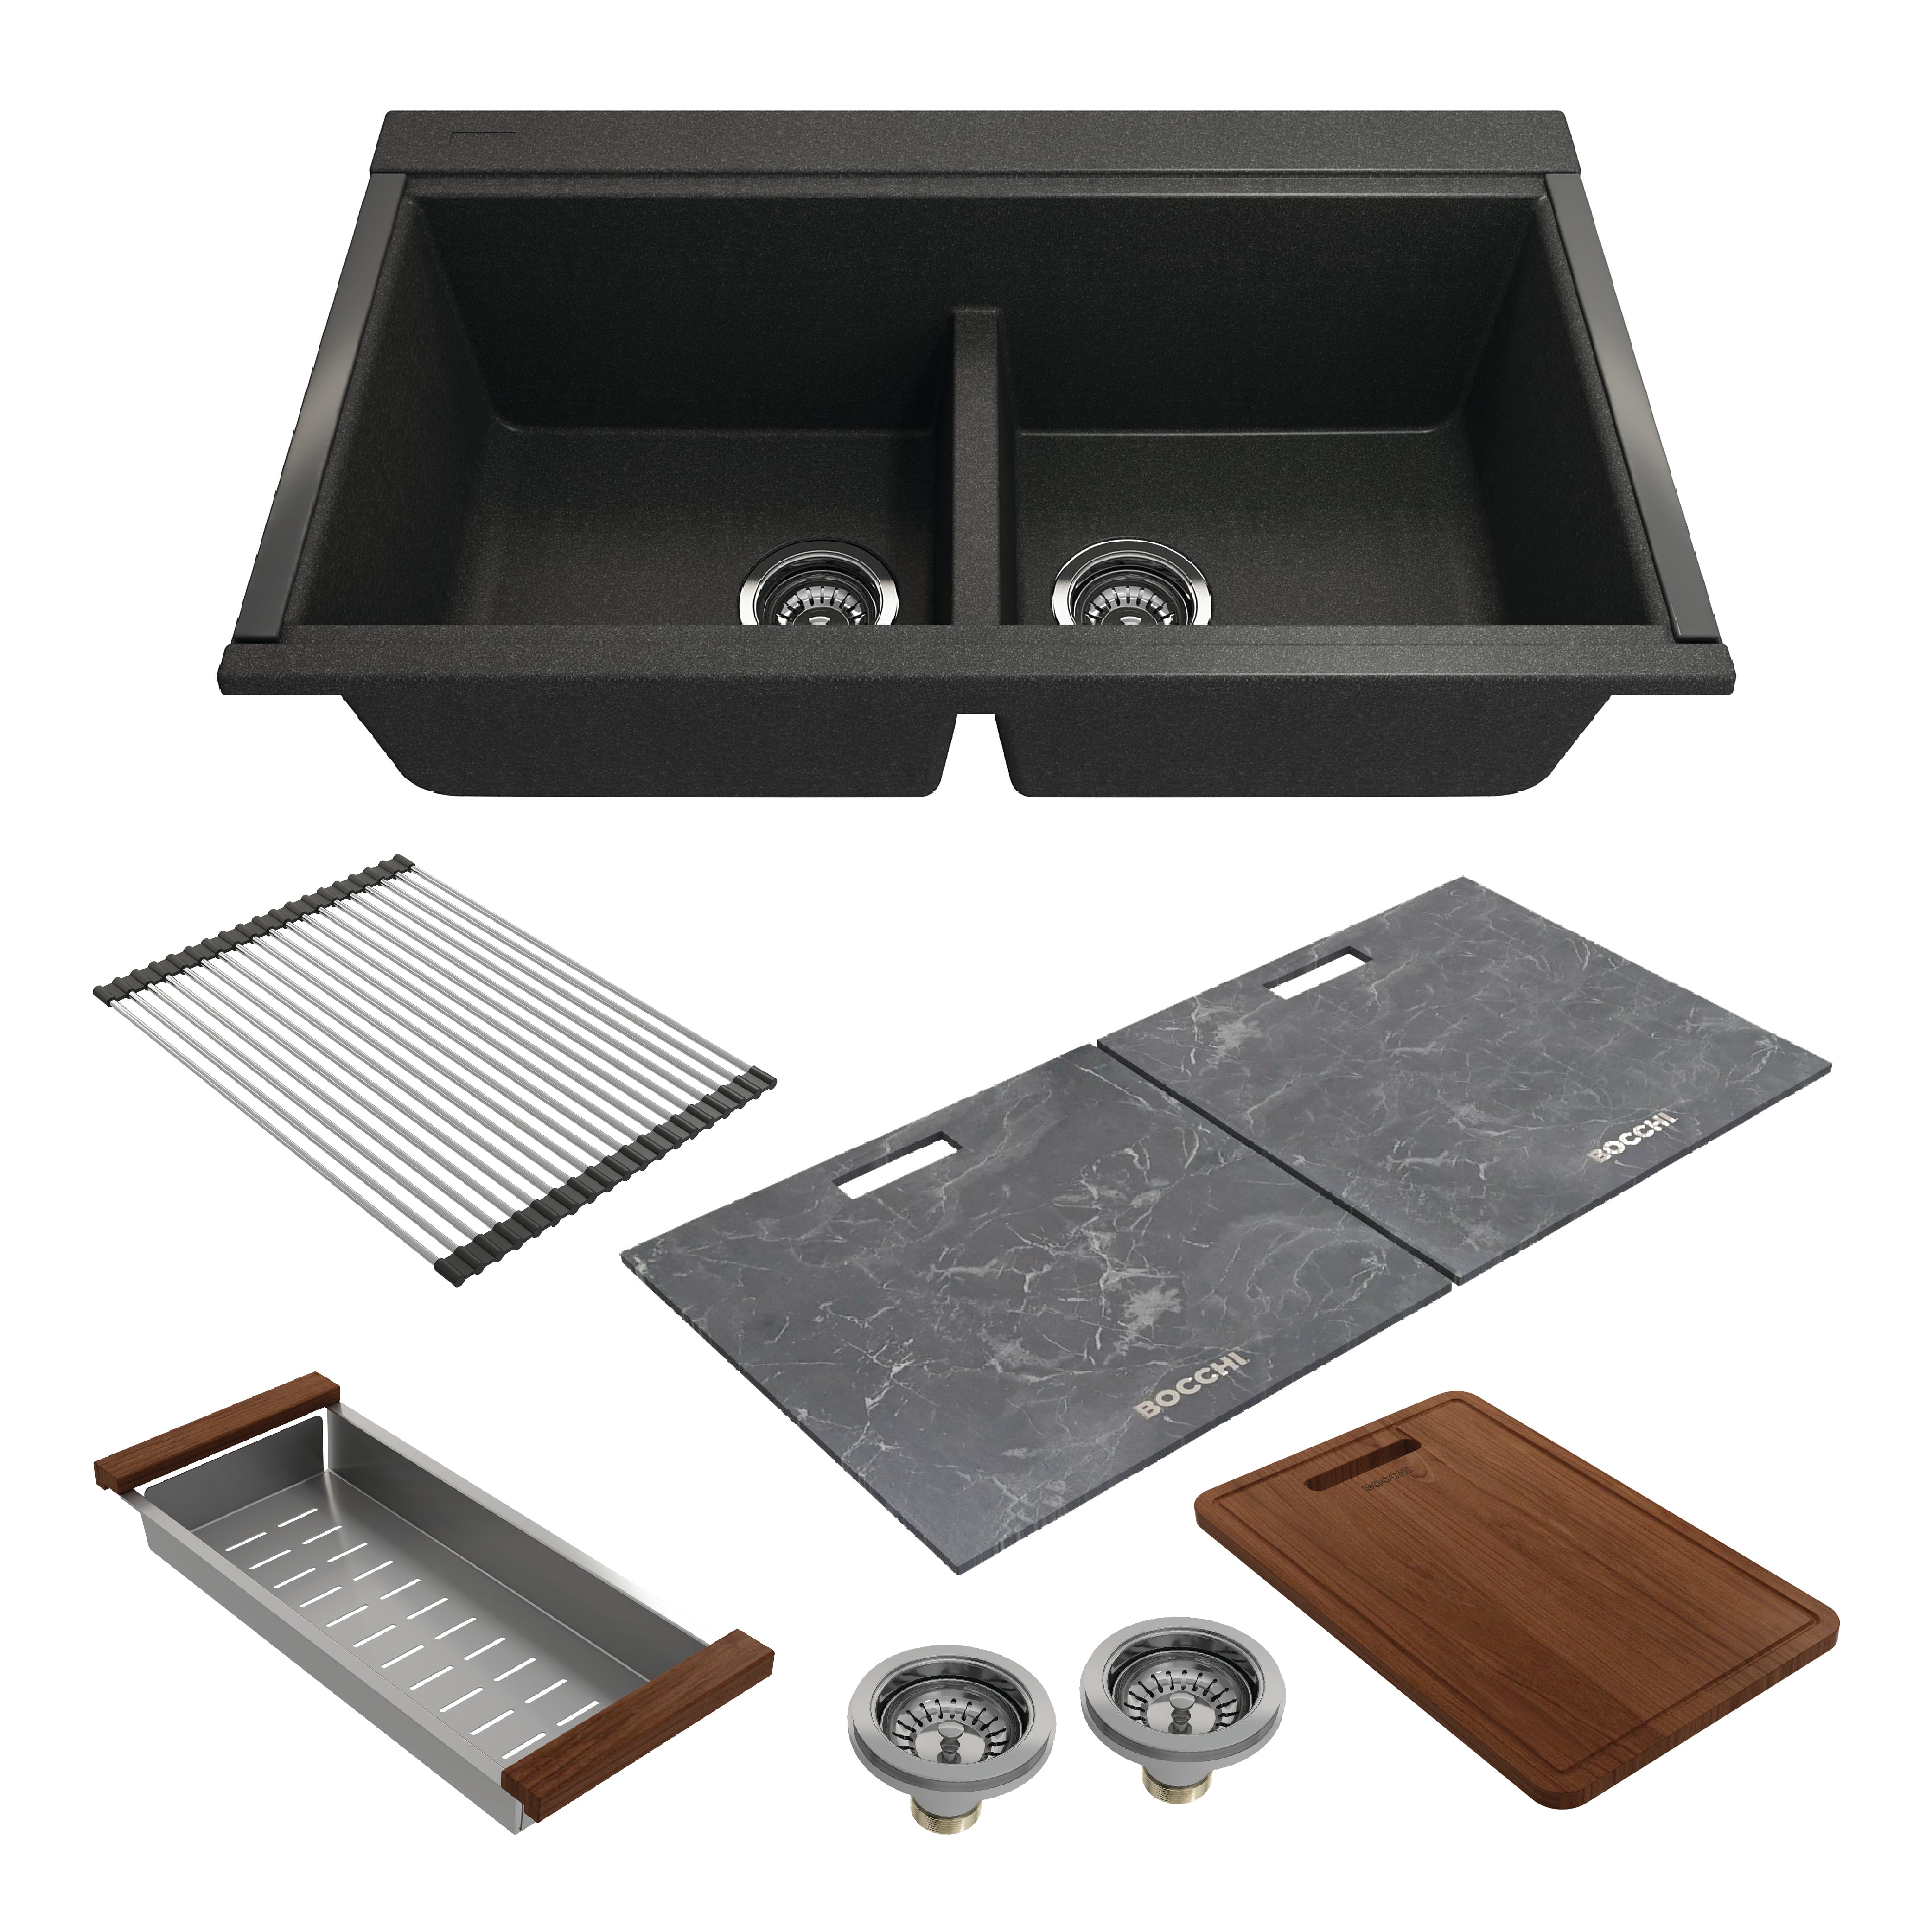 Bocchi 34" Undermount Double Bowl Composite Workstation Kitchen Sink with Covers in Metallic Black